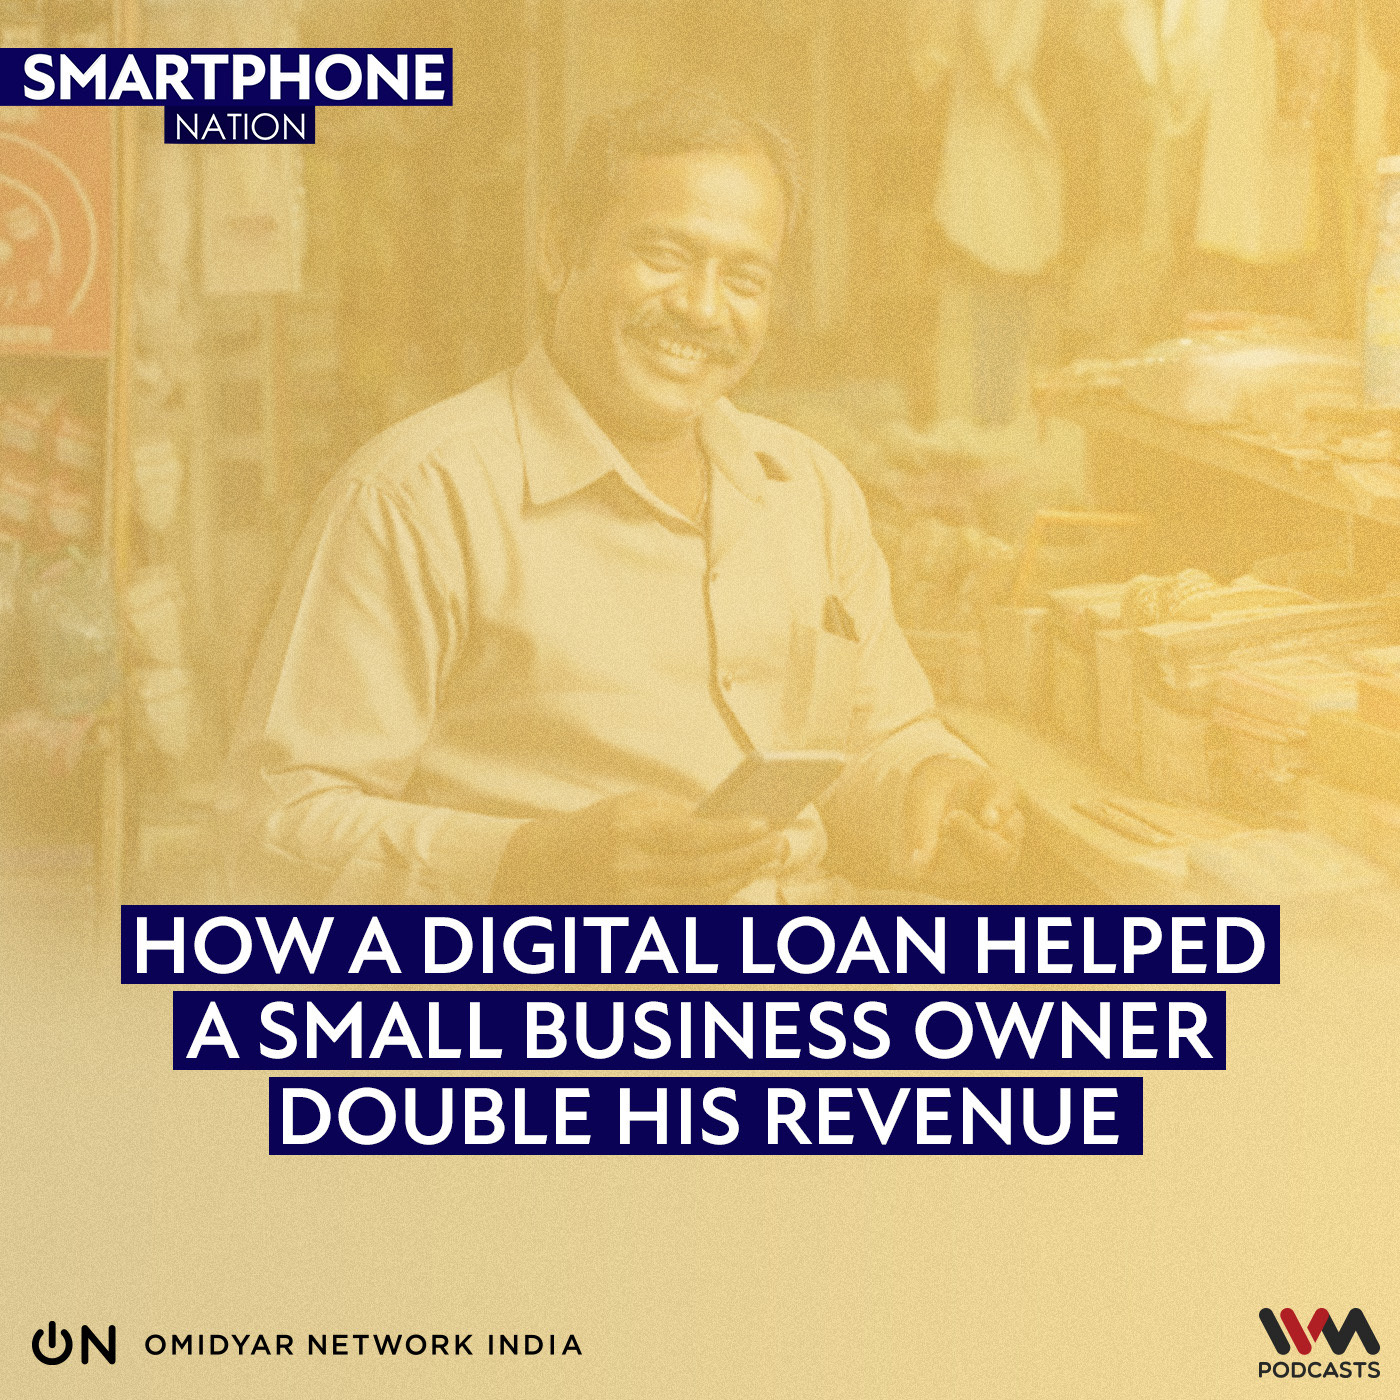 How a Digital Loan Helped a Small Business Owner Double his Revenue